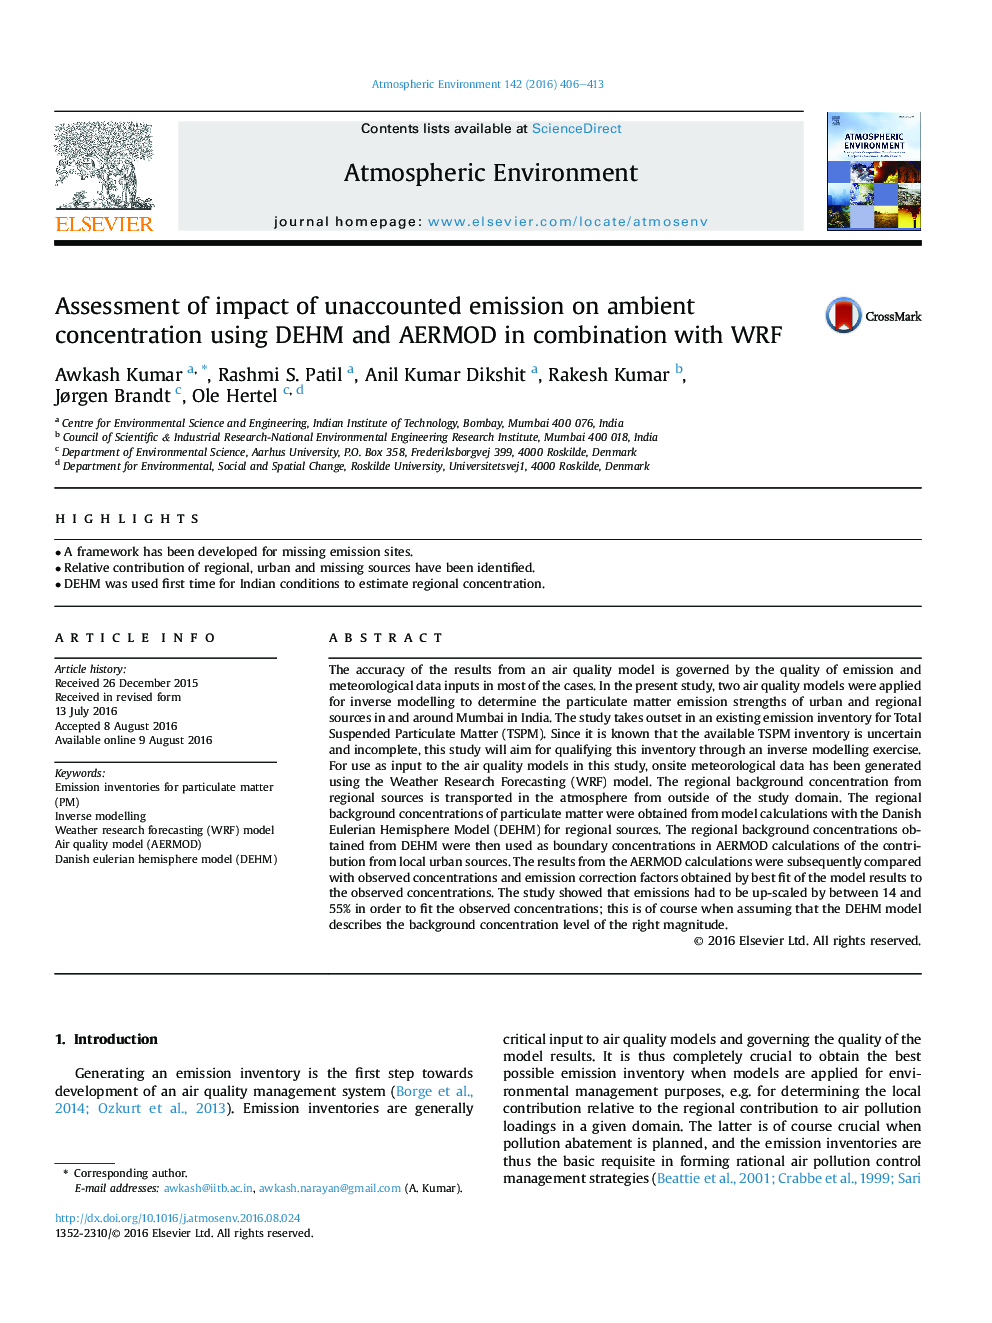 Assessment of impact of unaccounted emission on ambient concentration using DEHM and AERMOD in combination with WRF